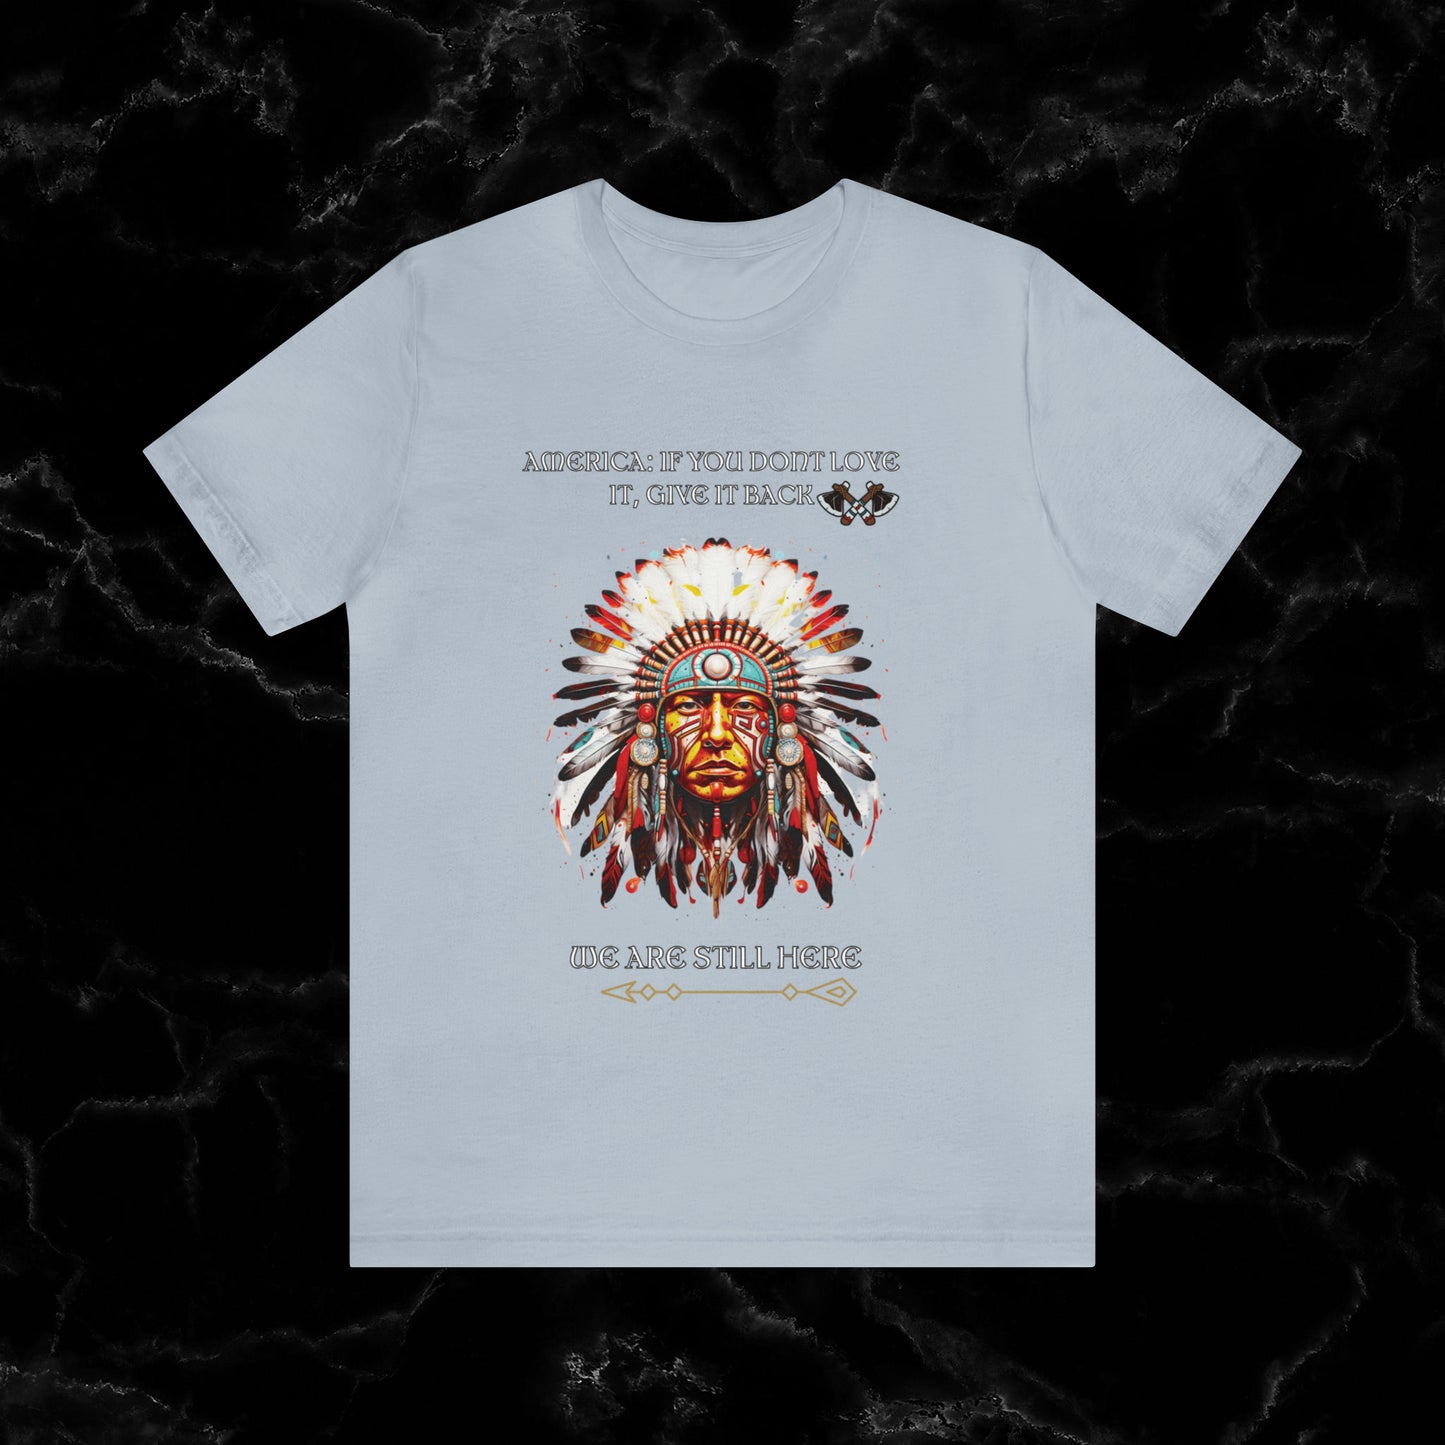 America Love it Or Give It Back Vintage T-Shirt - Indigenous Native Shirt T-Shirt Light Blue S 